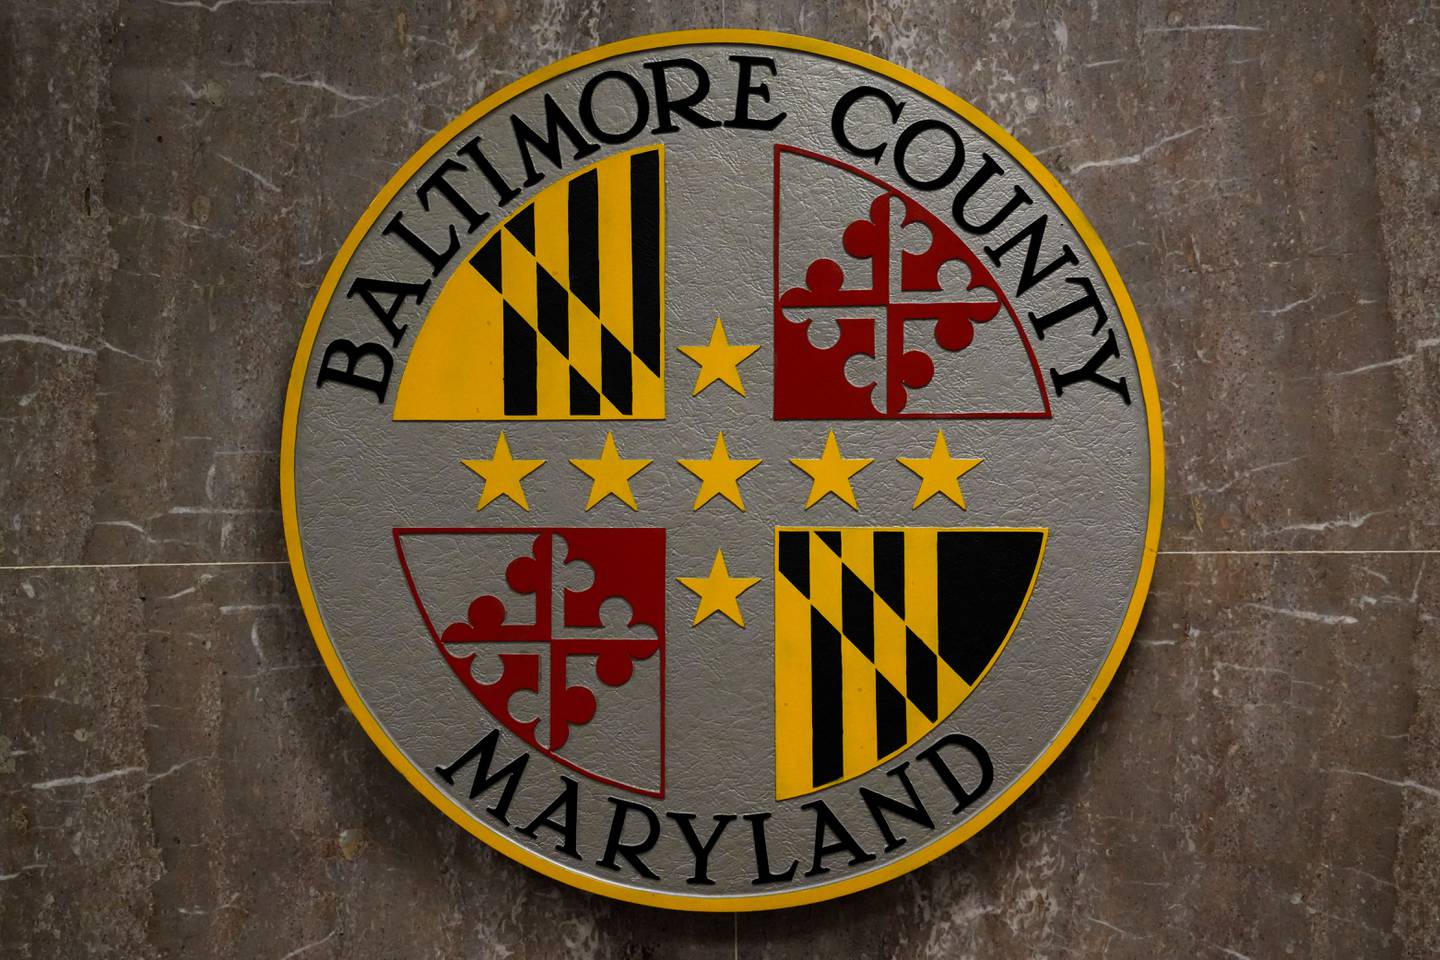 6/16/22—A sign reading “Baltimore County Maryland” hangs on the wall inside the historic Baltimore County Courthouse in Towson, the center of county government.